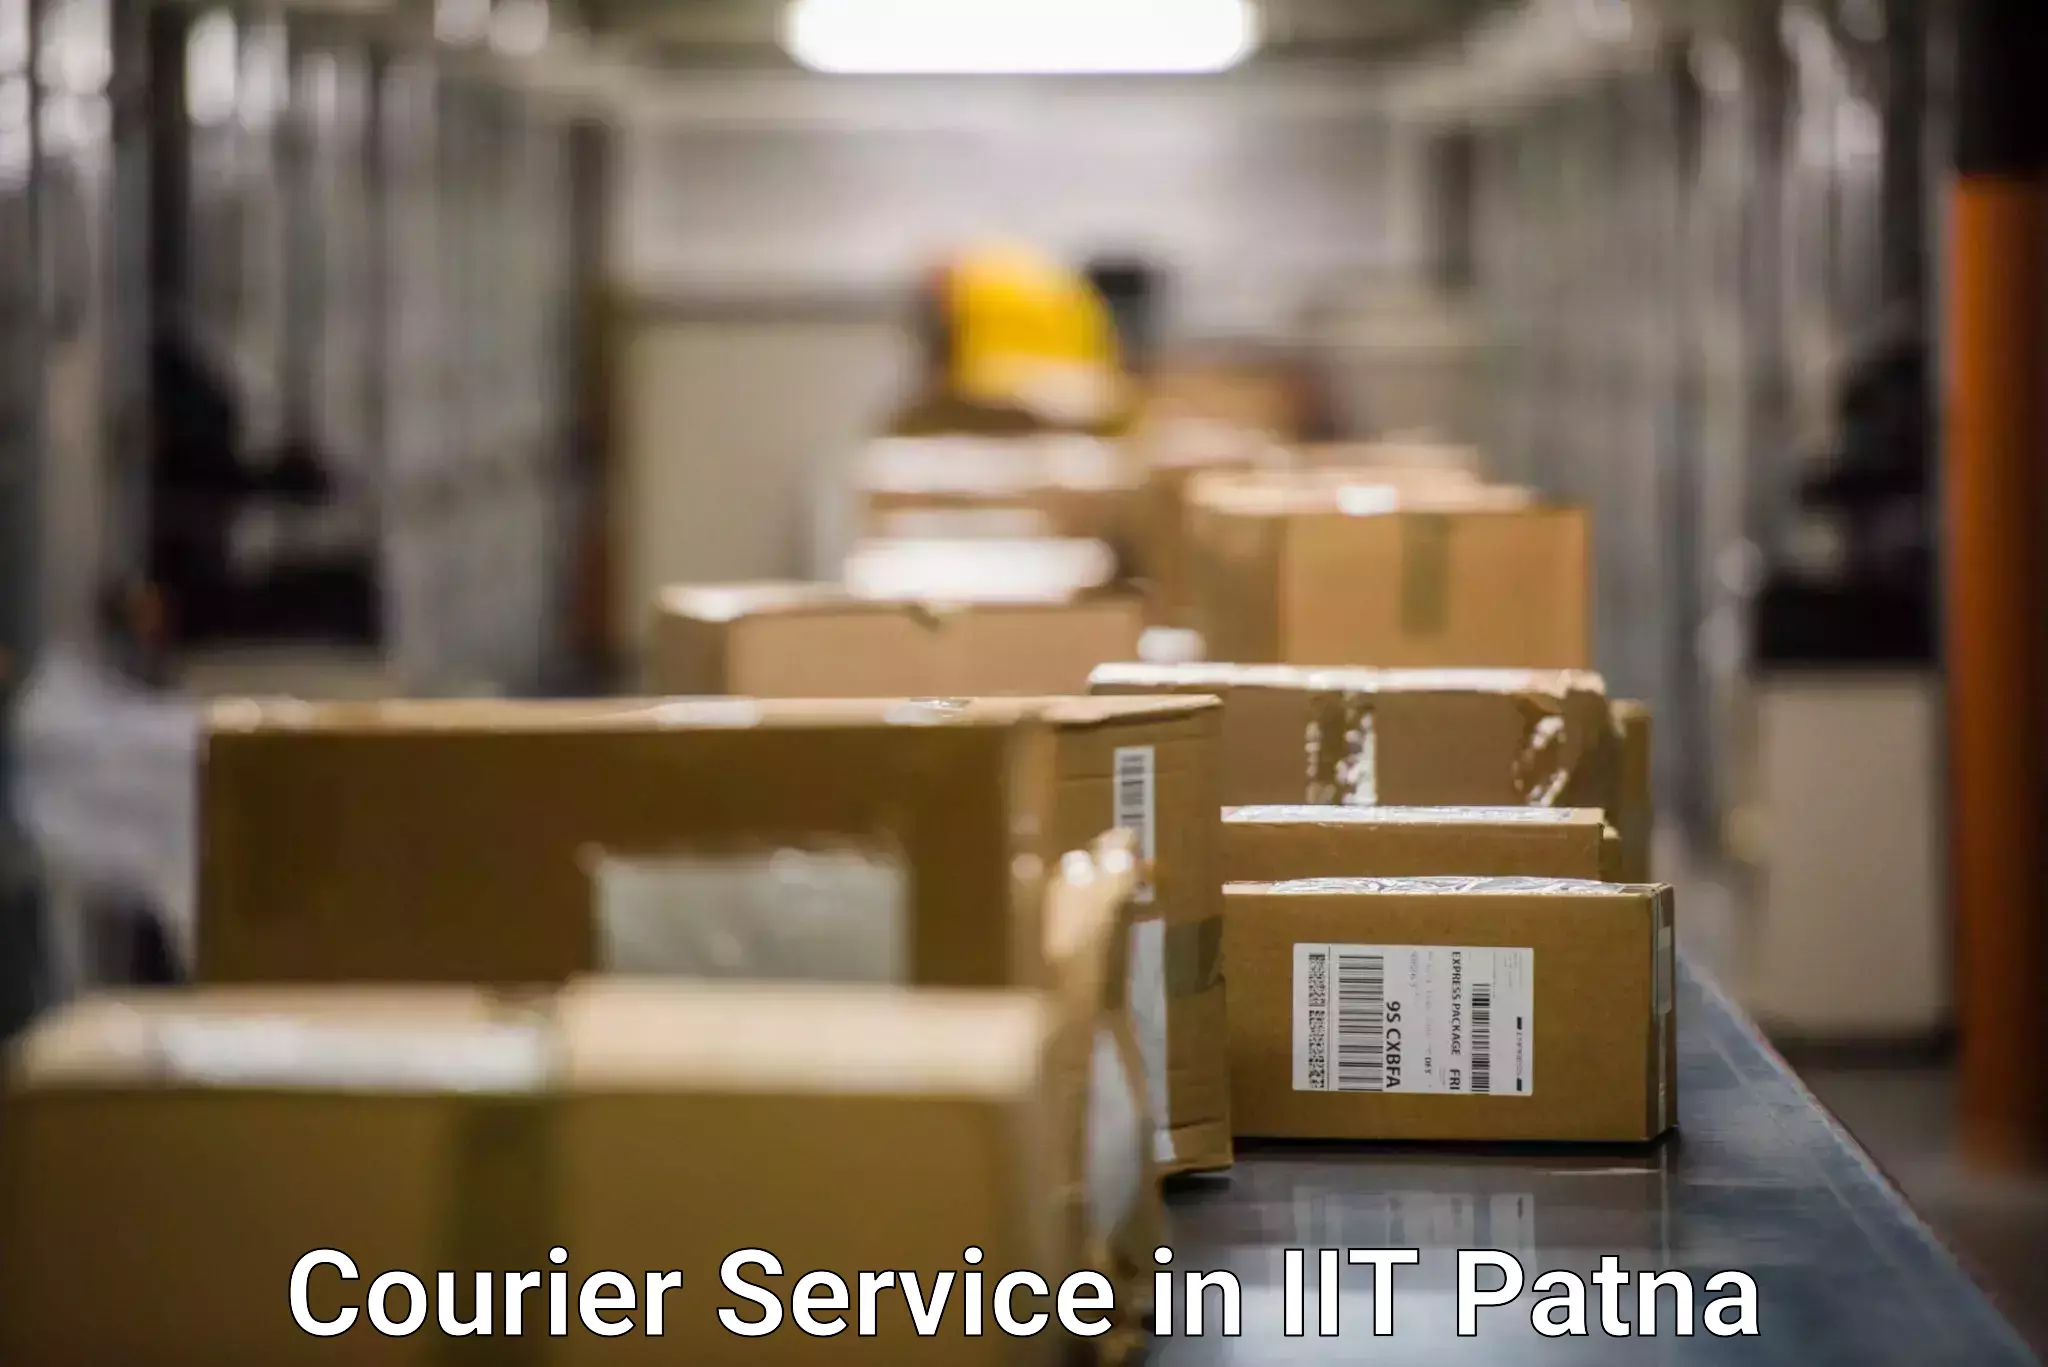 Rapid shipping services in IIT Patna